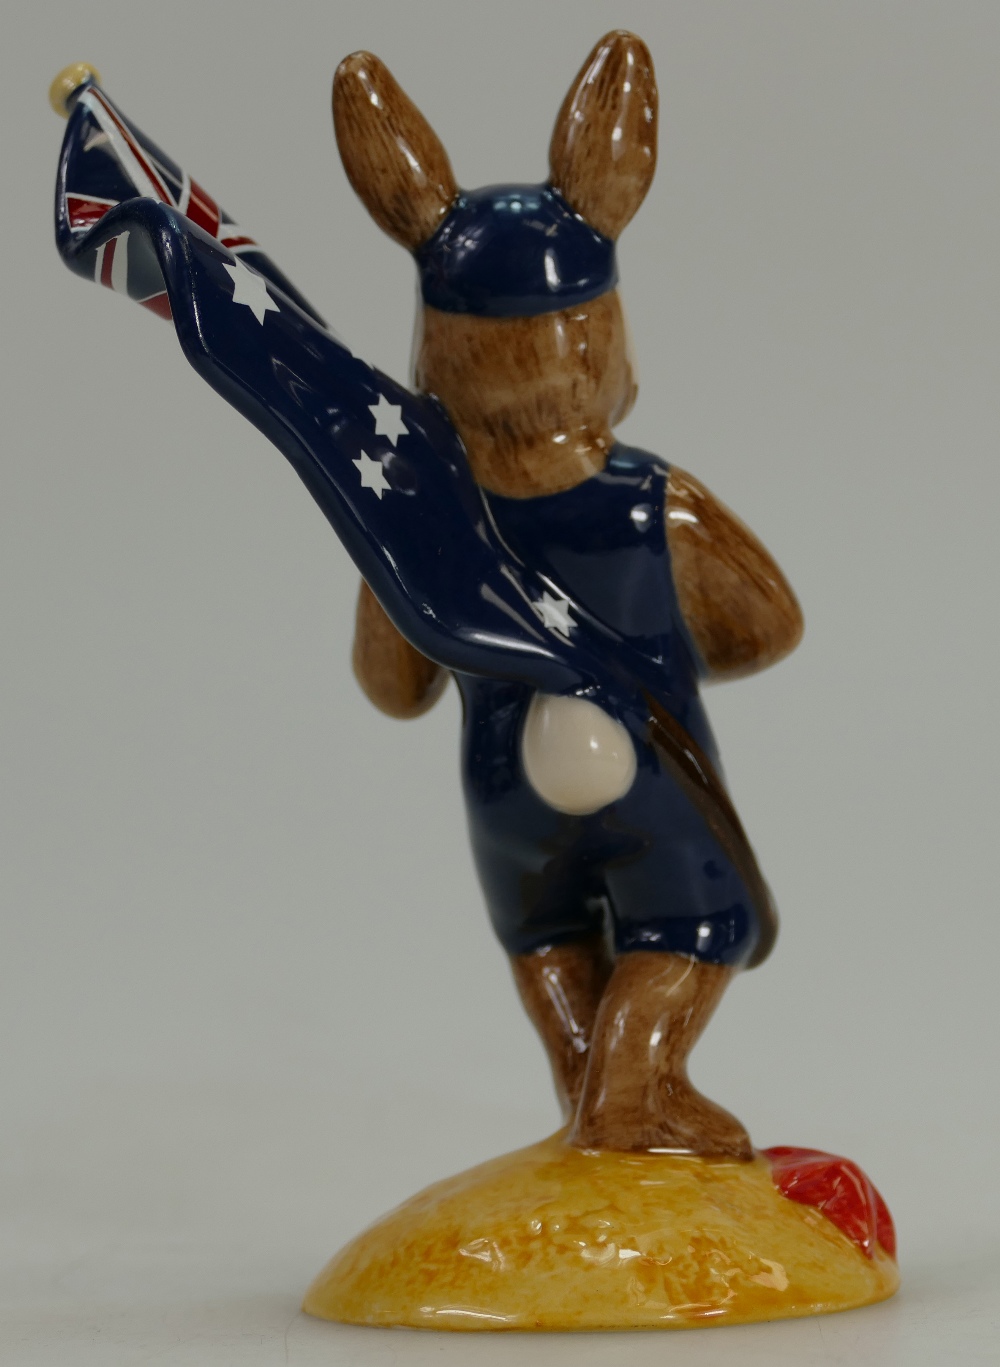 Royal Doulton Bunnykins Federation DB224 Limited edition for Dalbry Antiques Melbourne Australia - Image 3 of 3